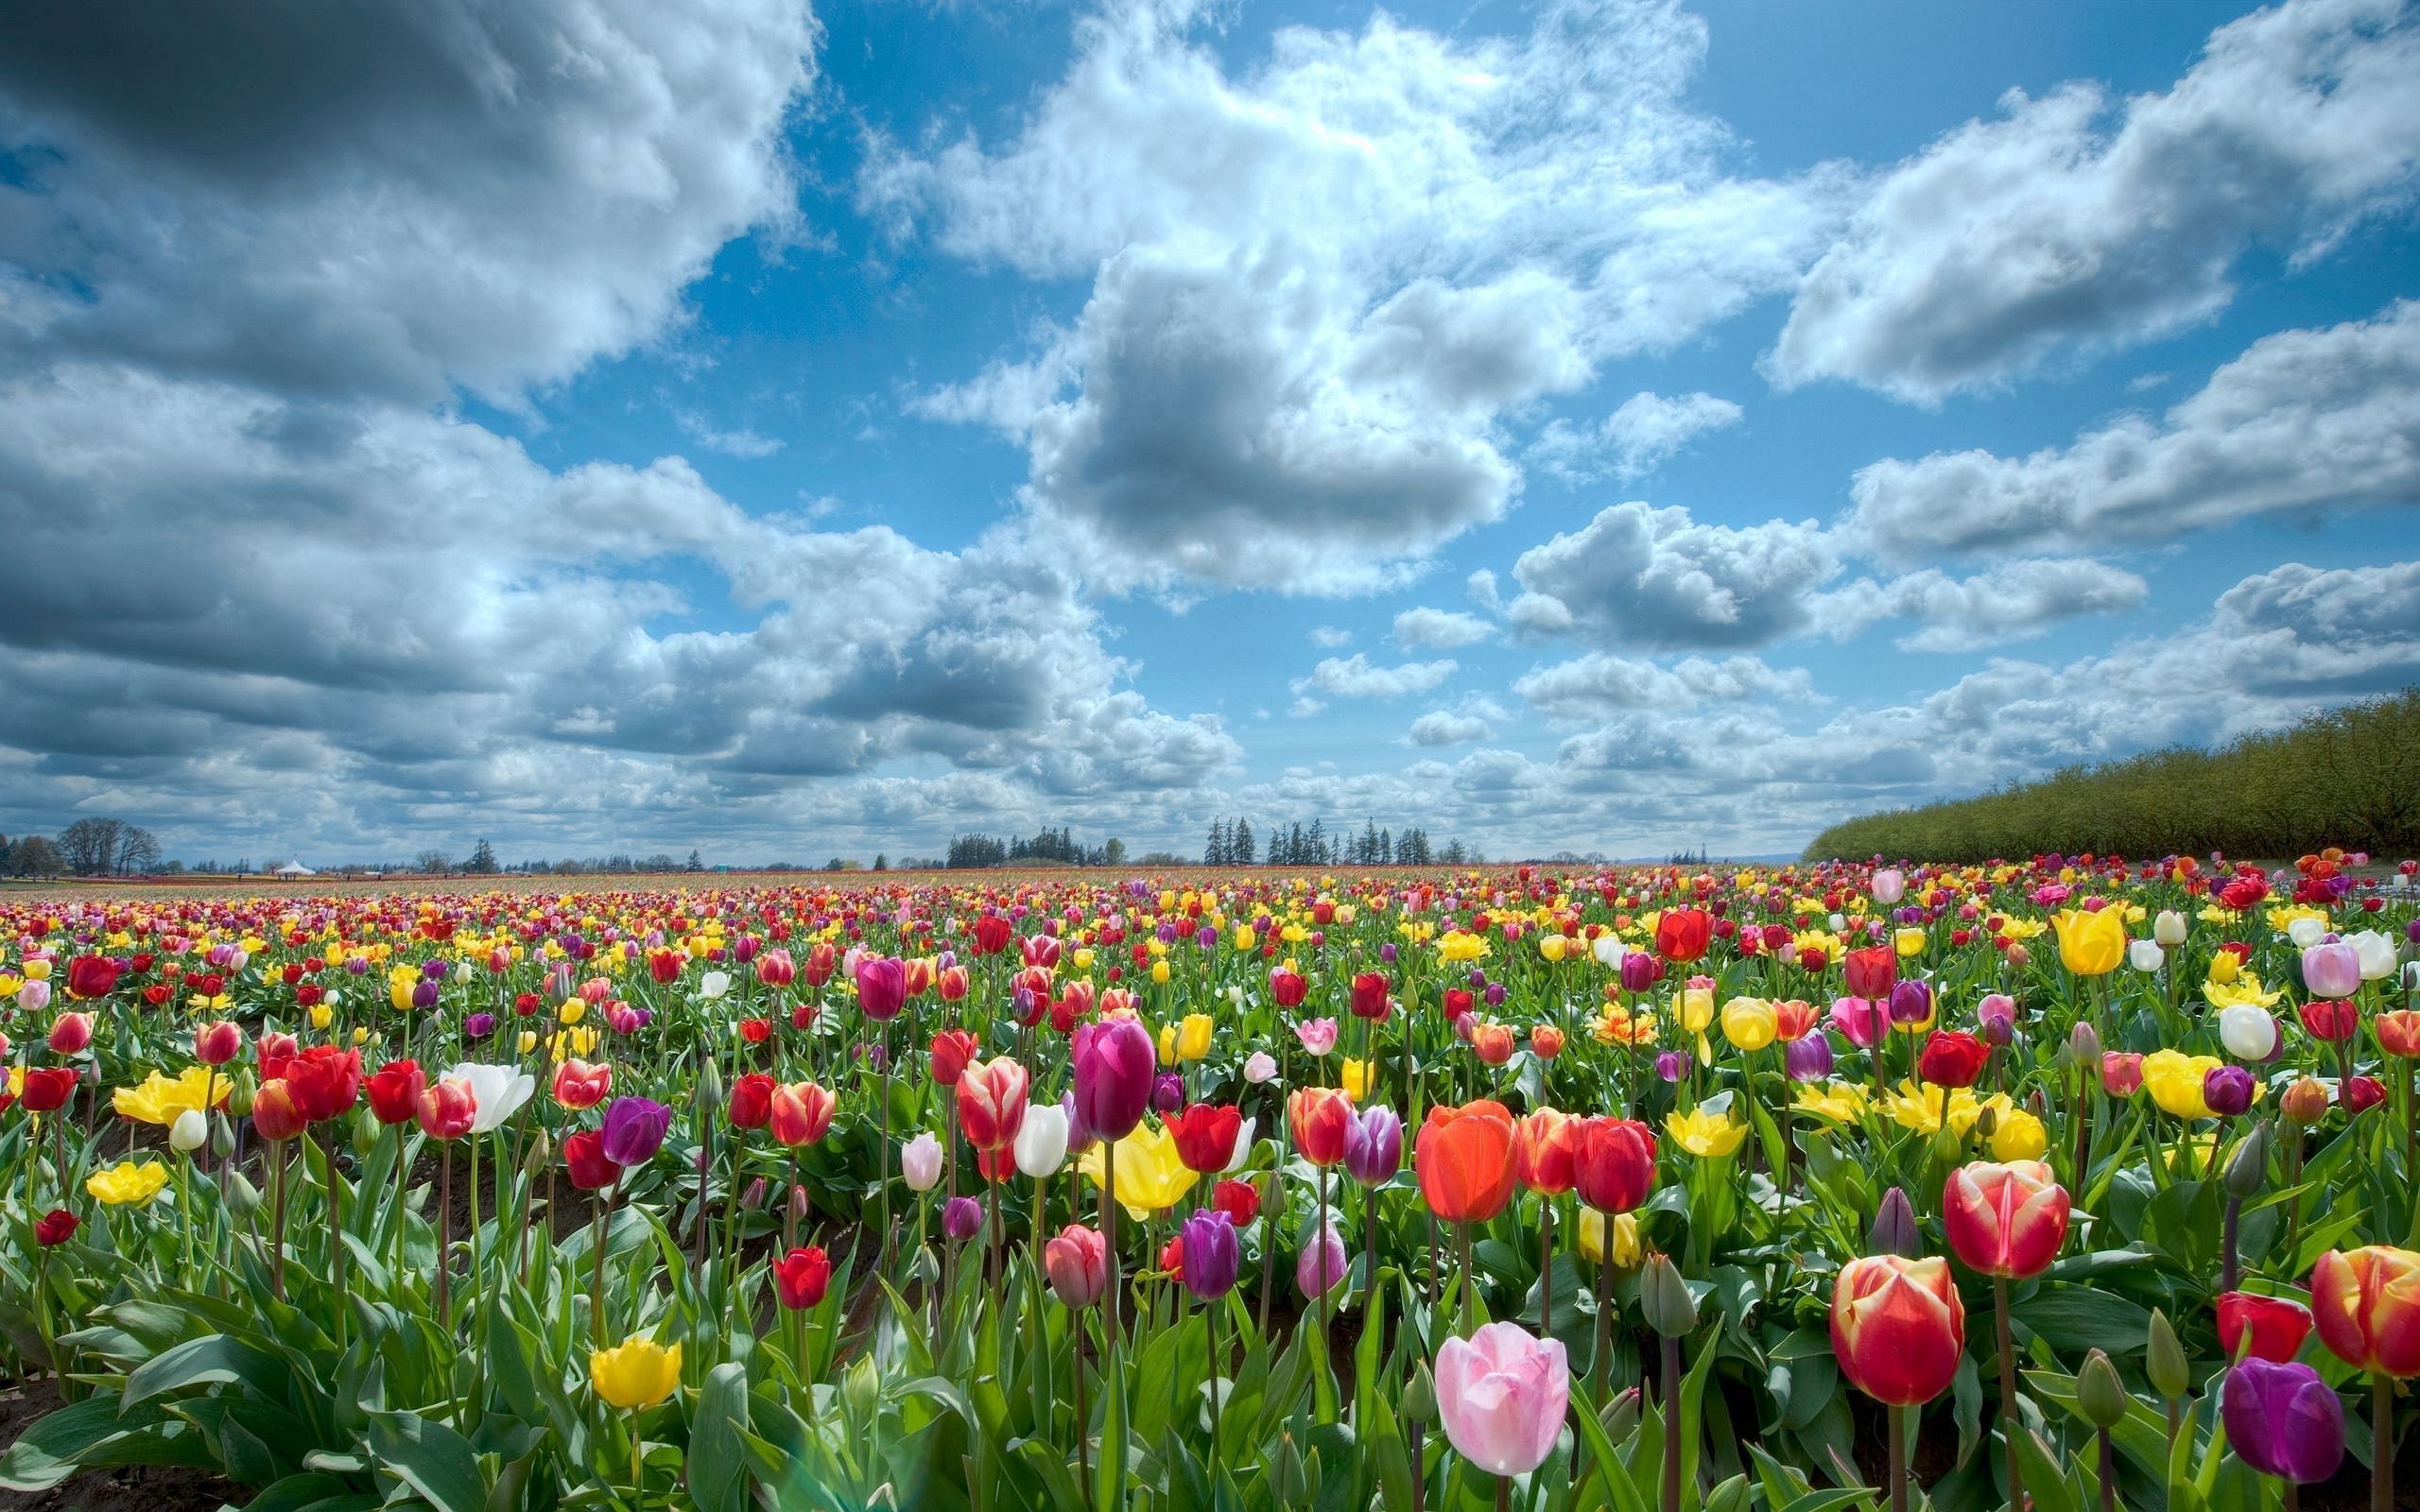 Google Image Result For Image Tulips Scenery